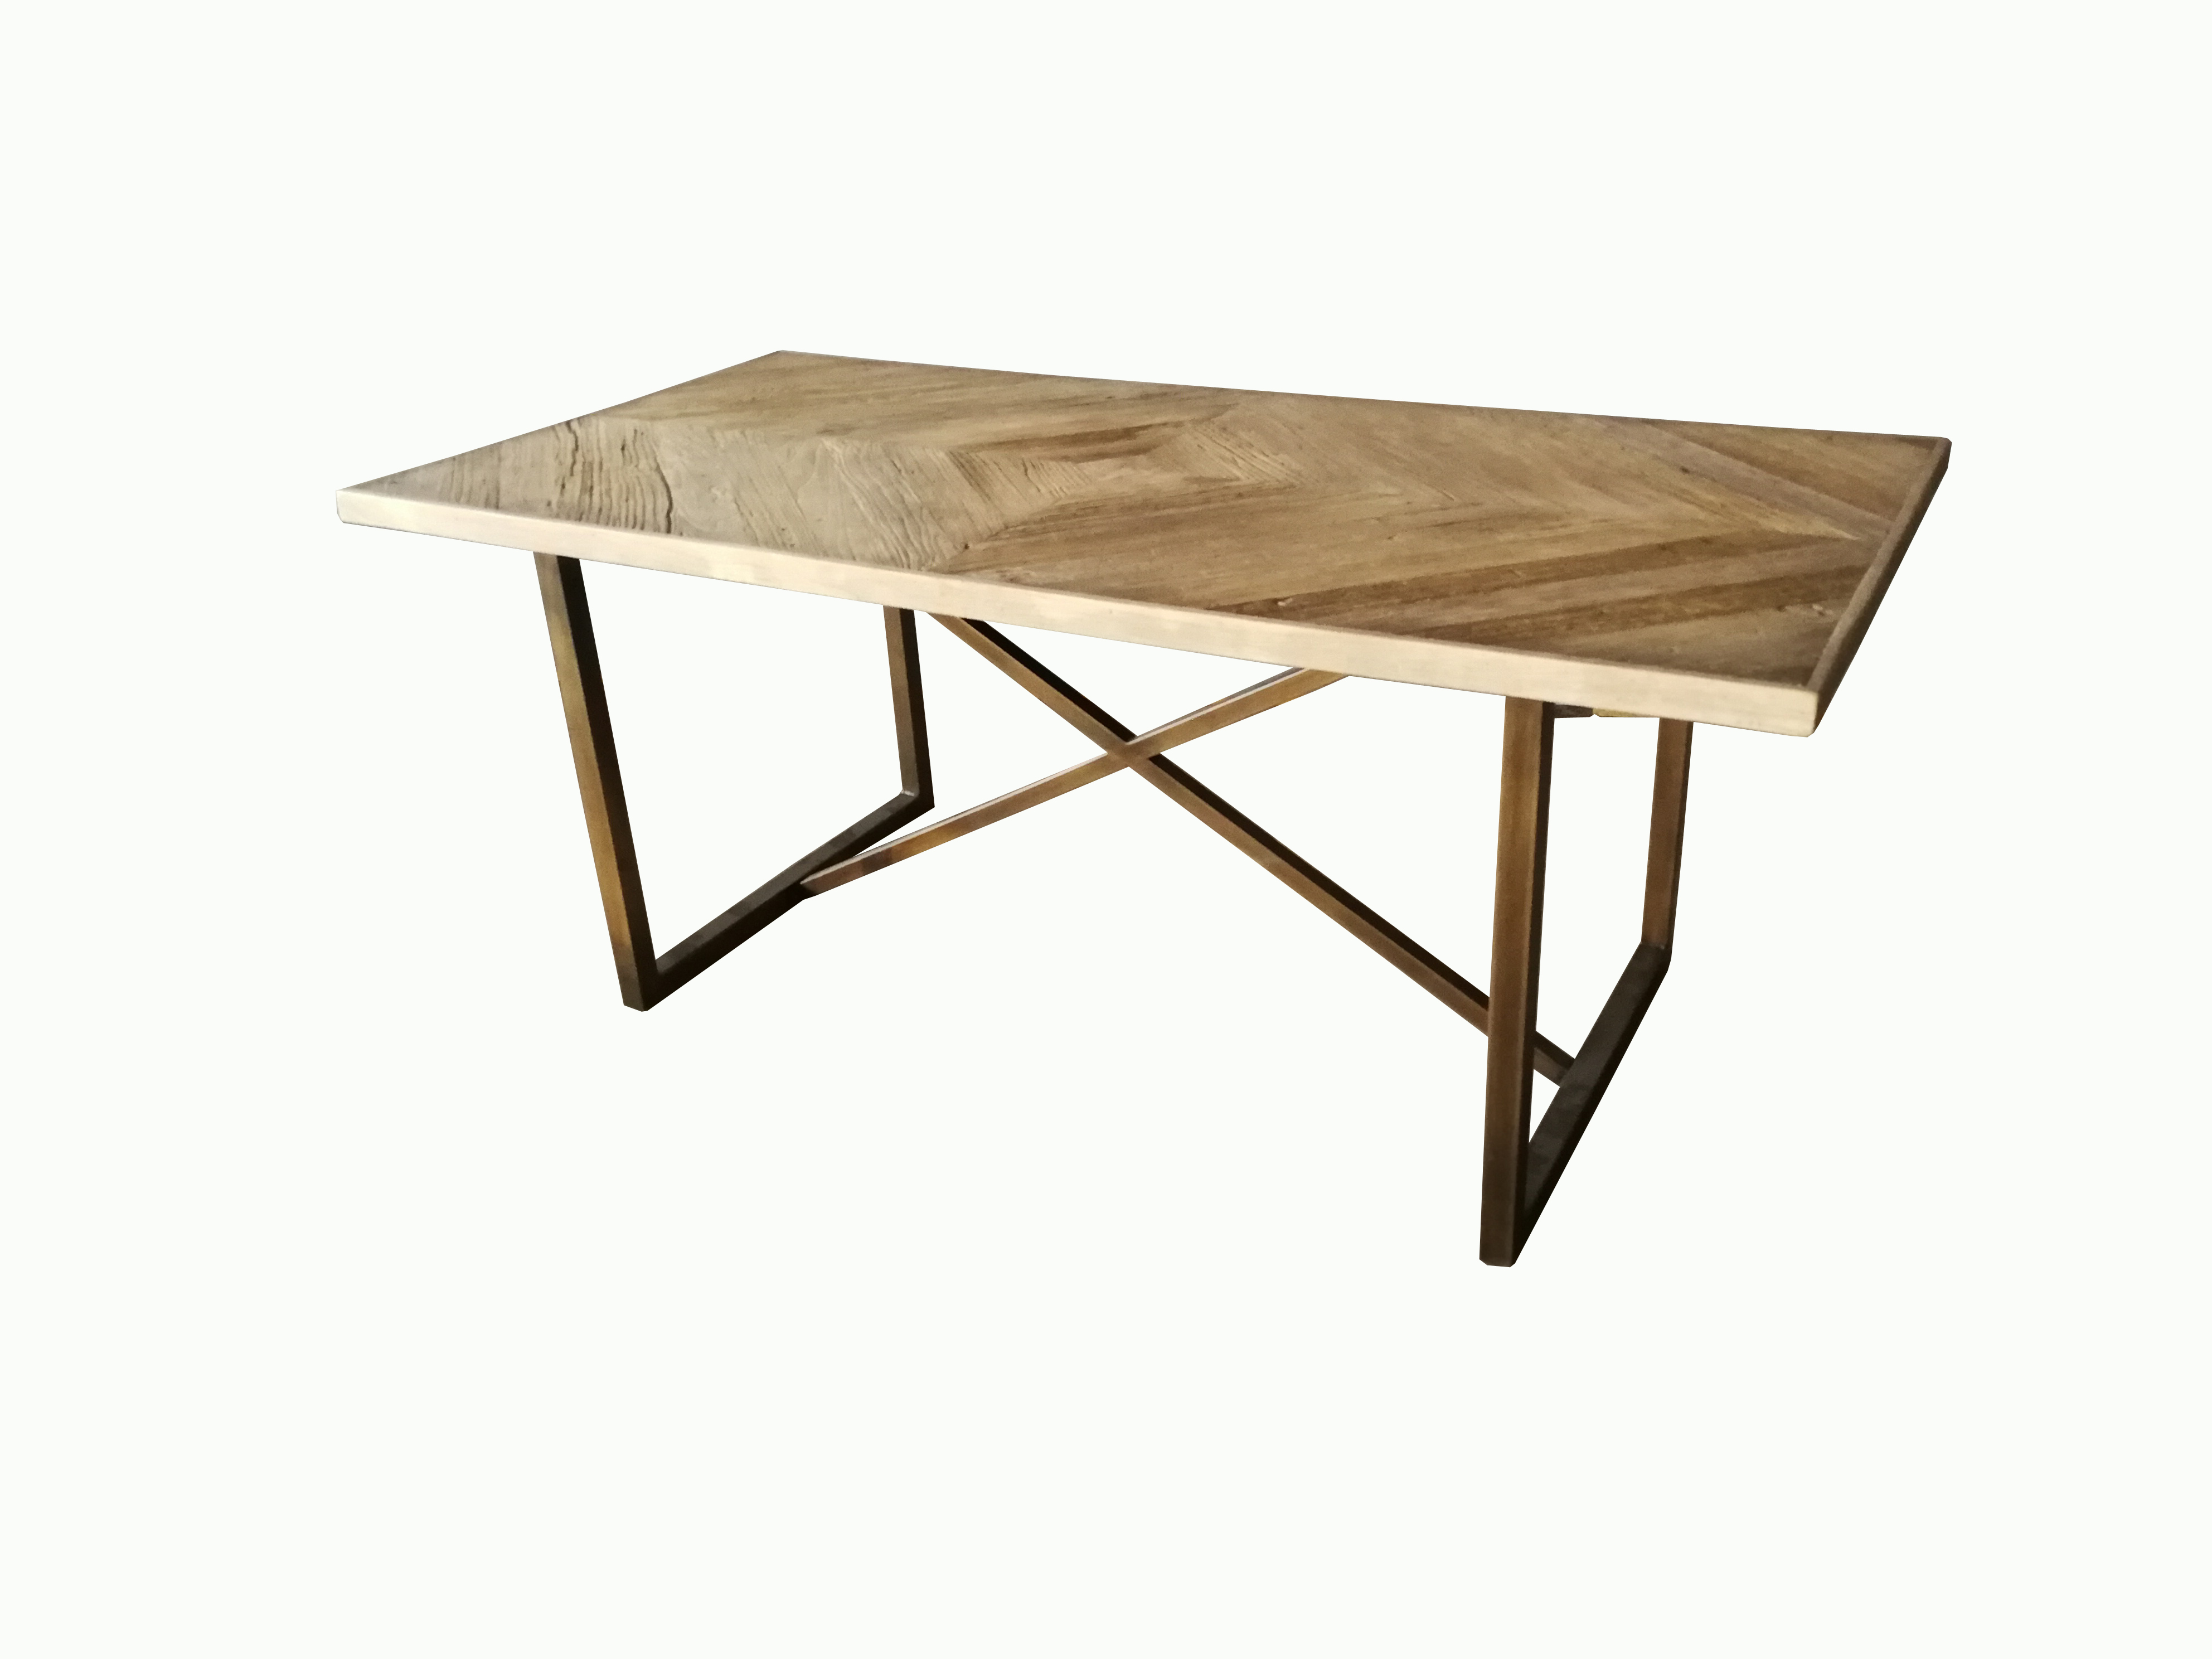 MD16-06--Iron dining table